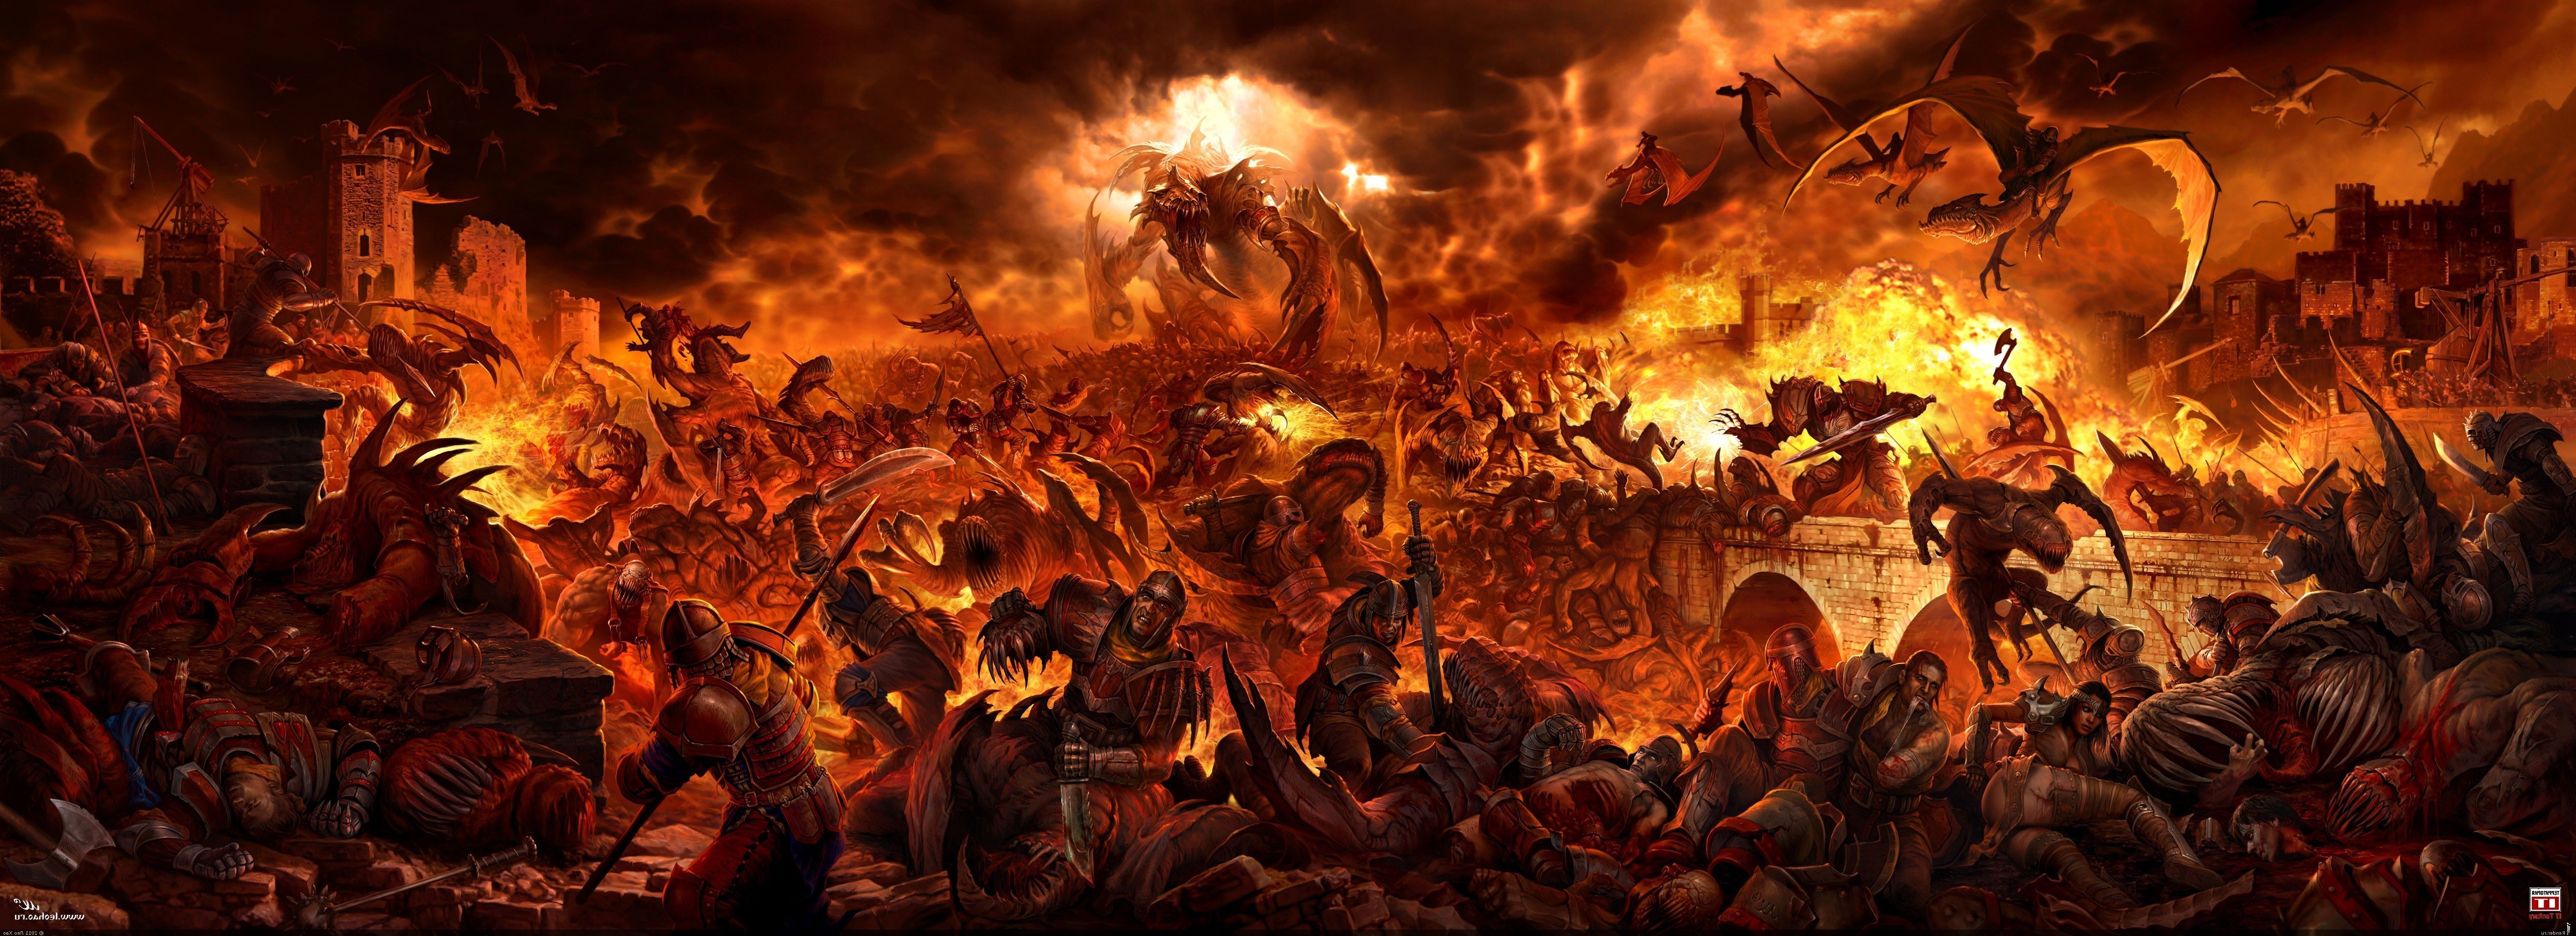 Hell Wallpaper Top Background